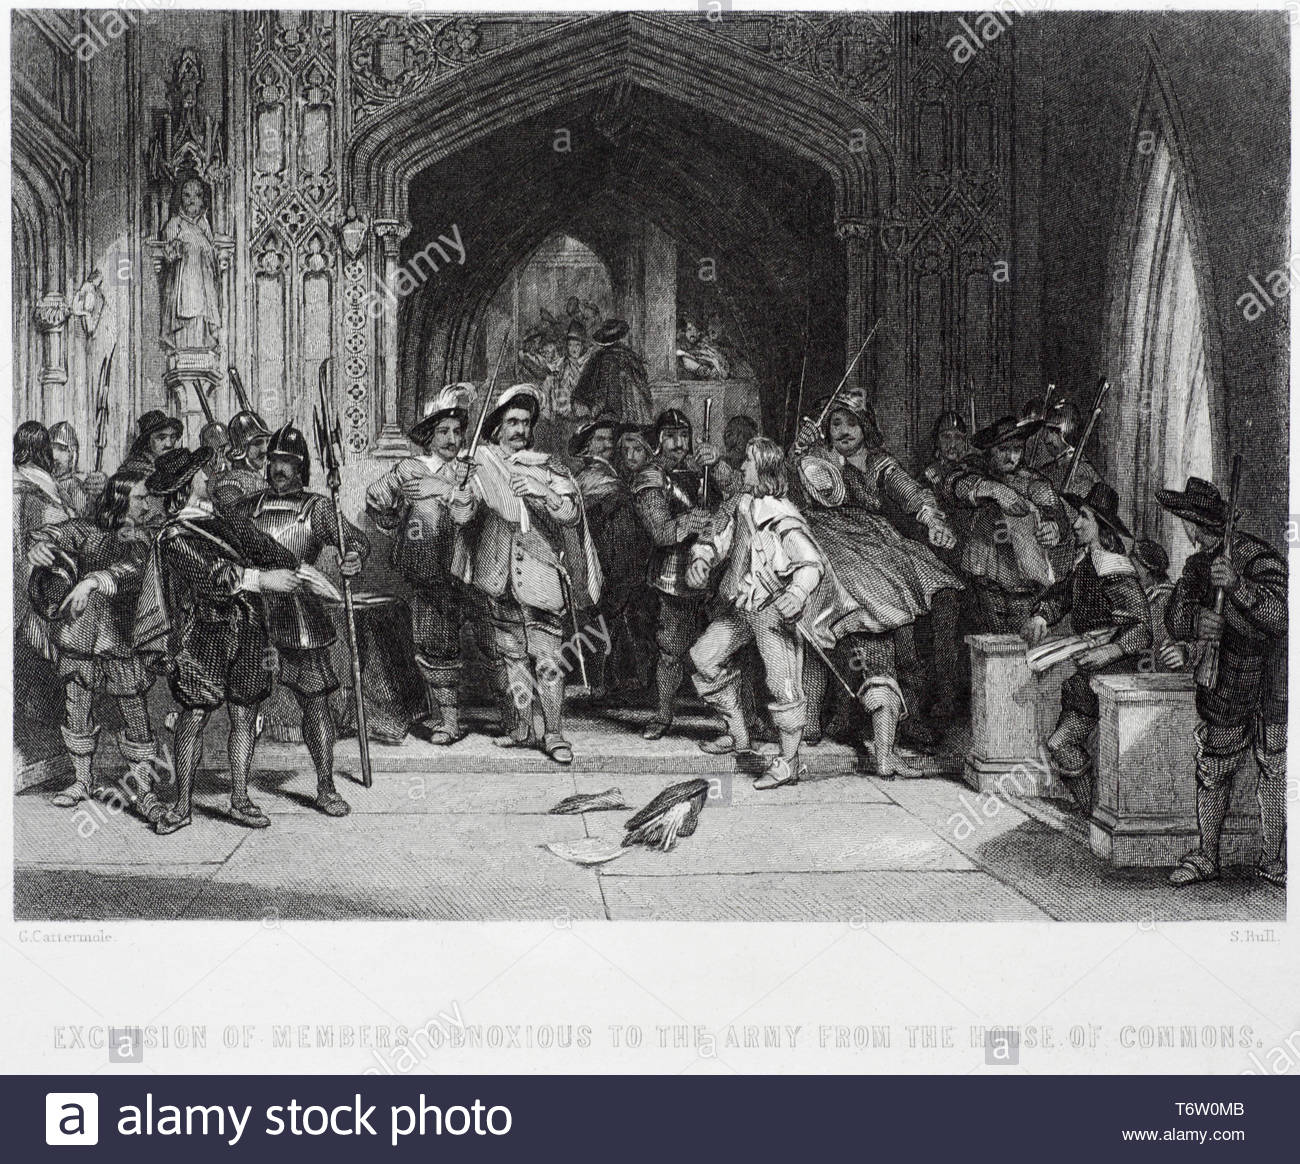 Pride's Purge took place in december 1648 as part of the English Civil War when Colonel Thomas Pride and his New Model Army Troops excluded from the House of Commons members of parliament who were not supporters of the grandees of the New Model Army,  vintage engraving from c1850 Stock Photo